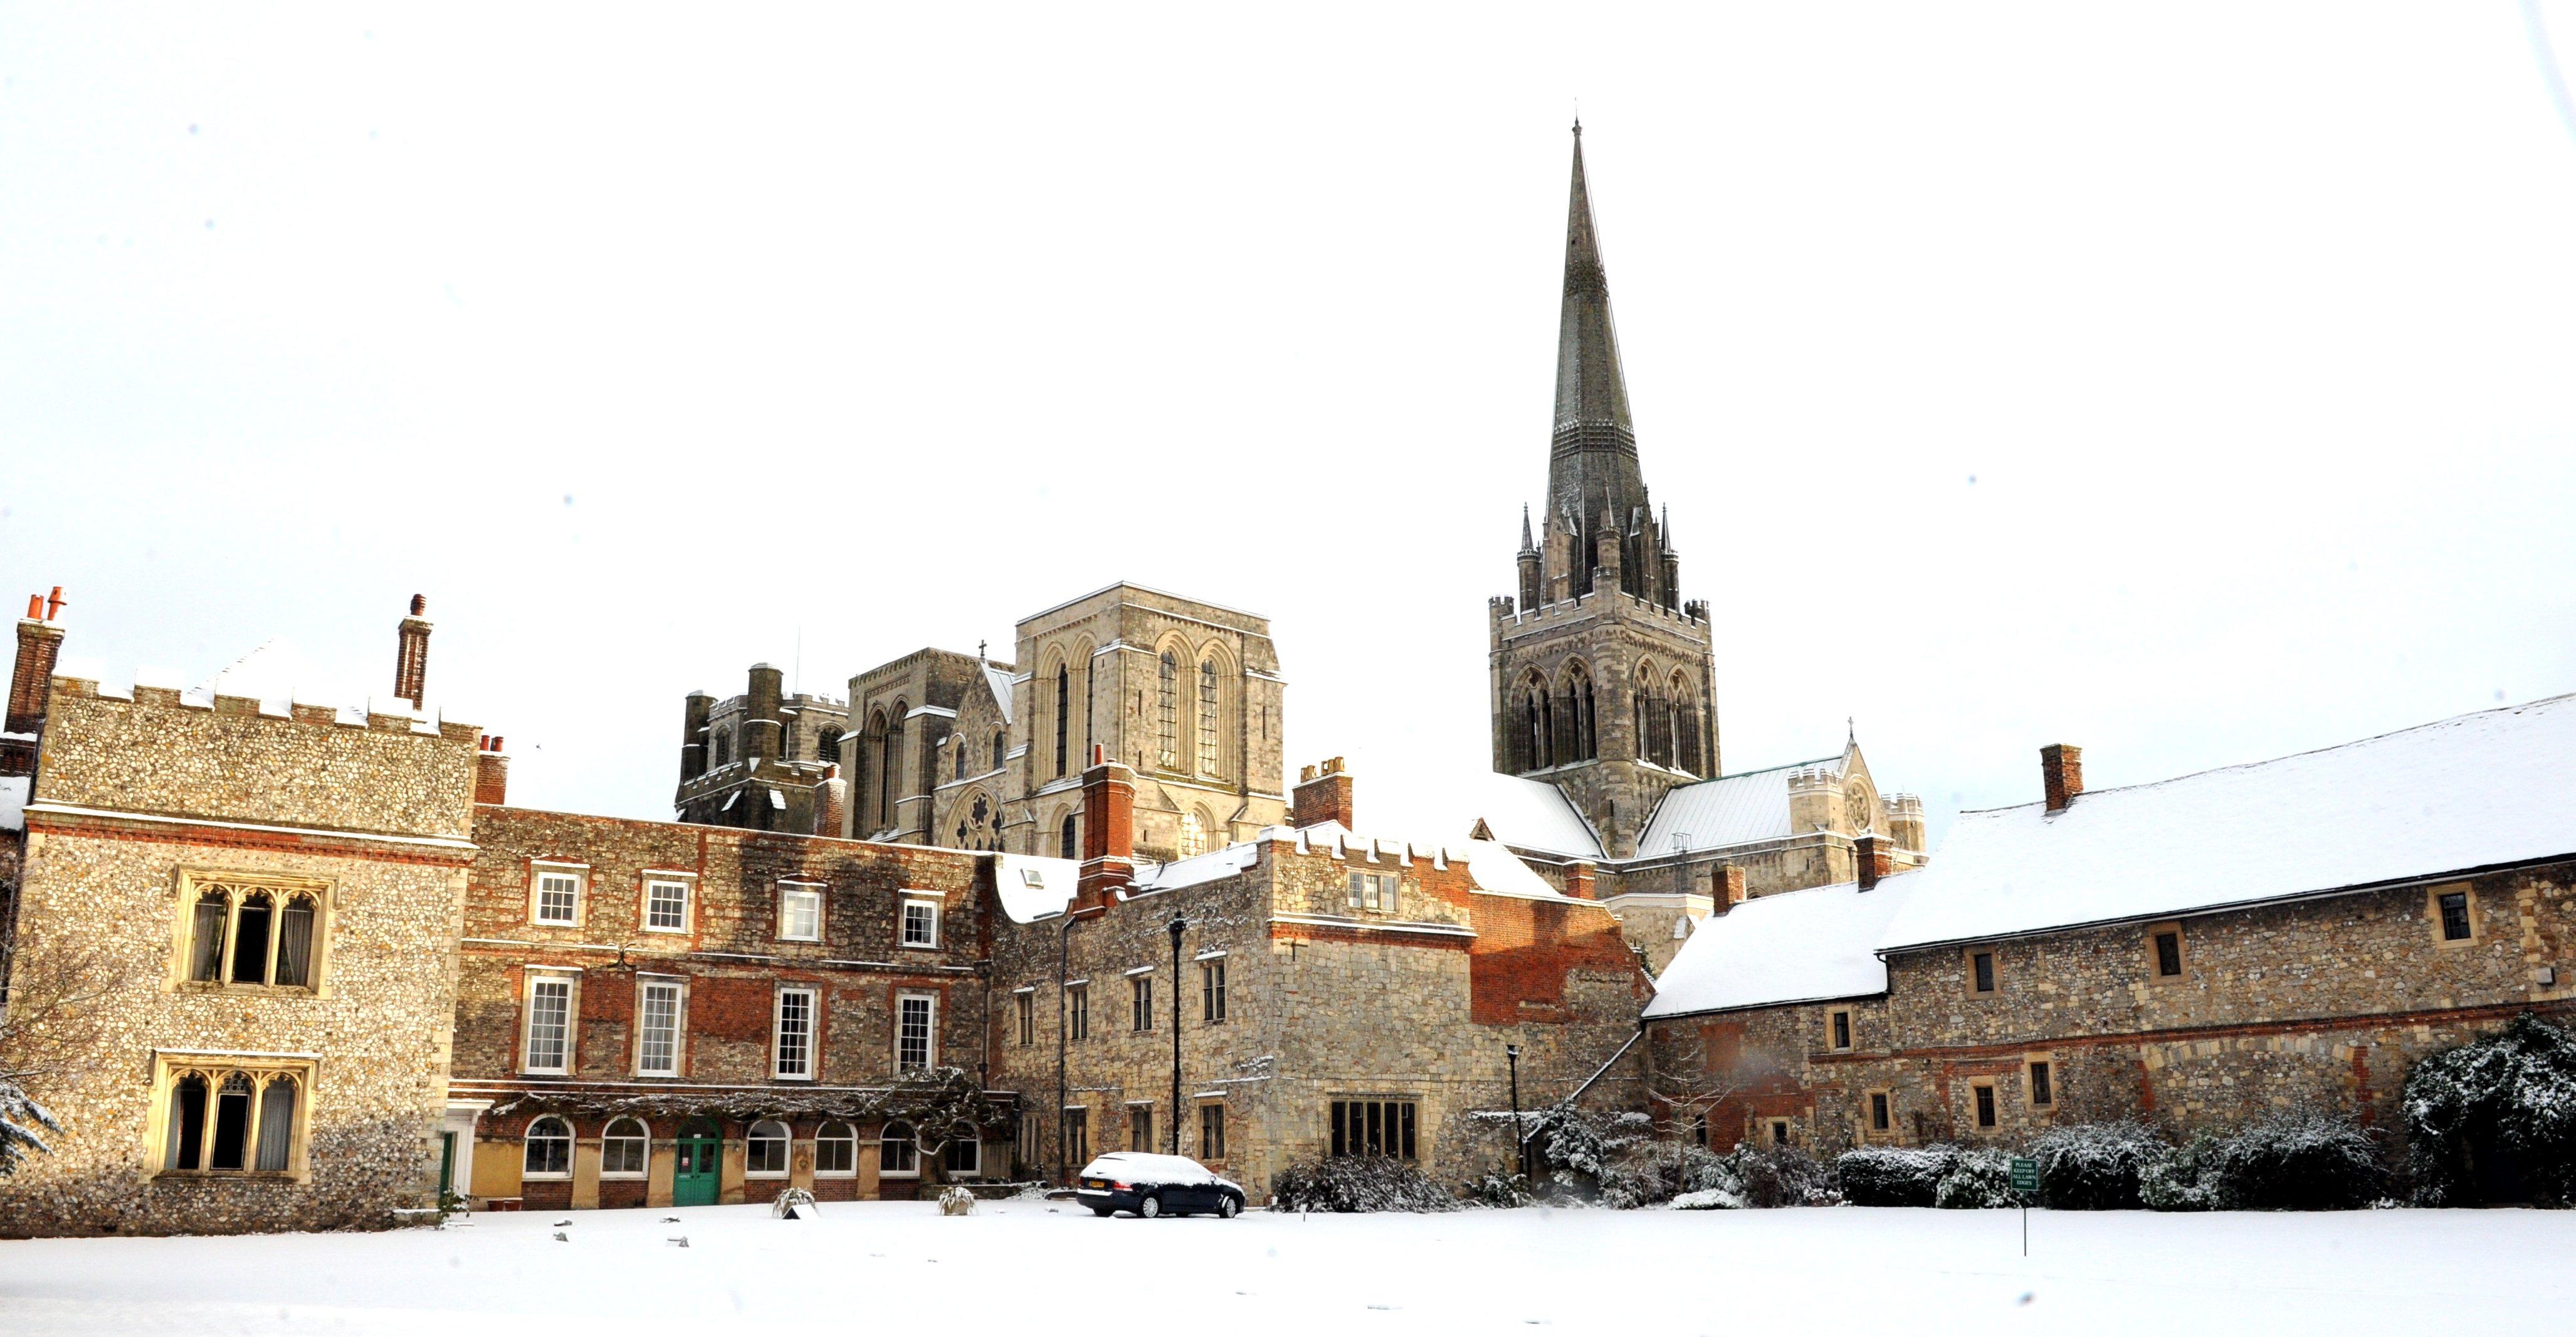 A snowy Bishop's Palace in Chichester in December 2010